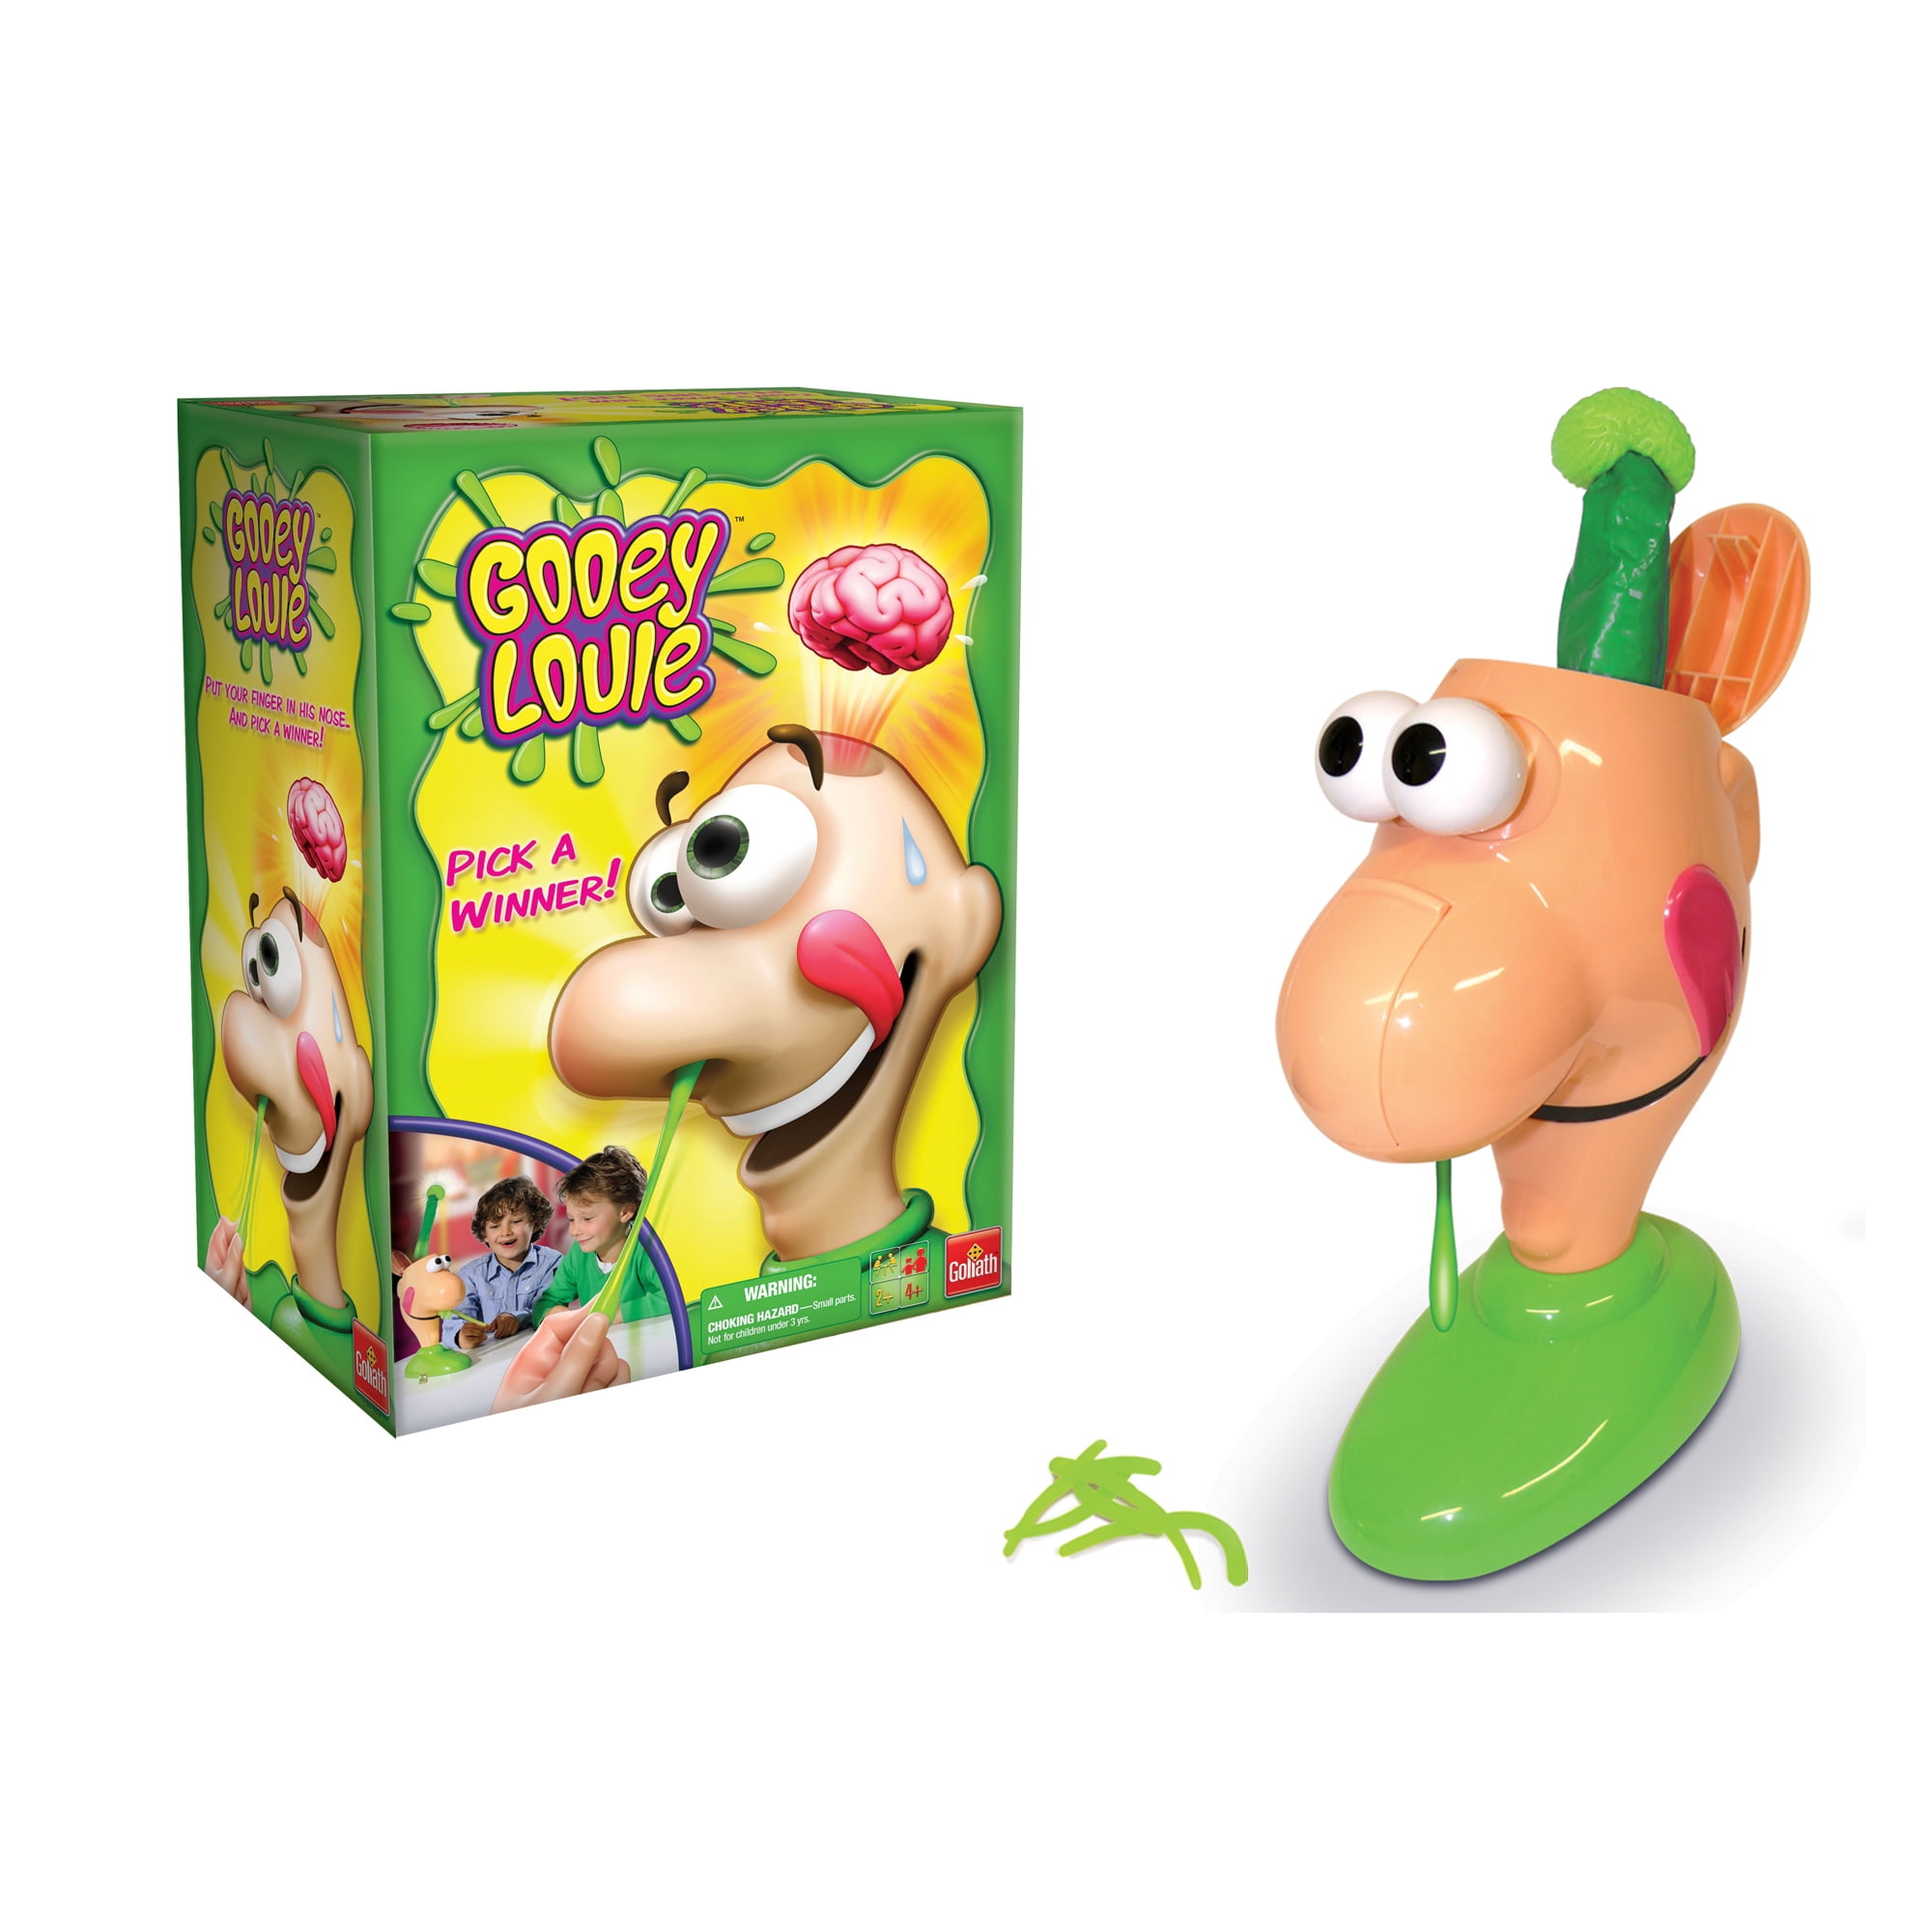 100 Complete for sale online 2012 Gooey Louie Game by Goliath Pull out Boogers From His Nose